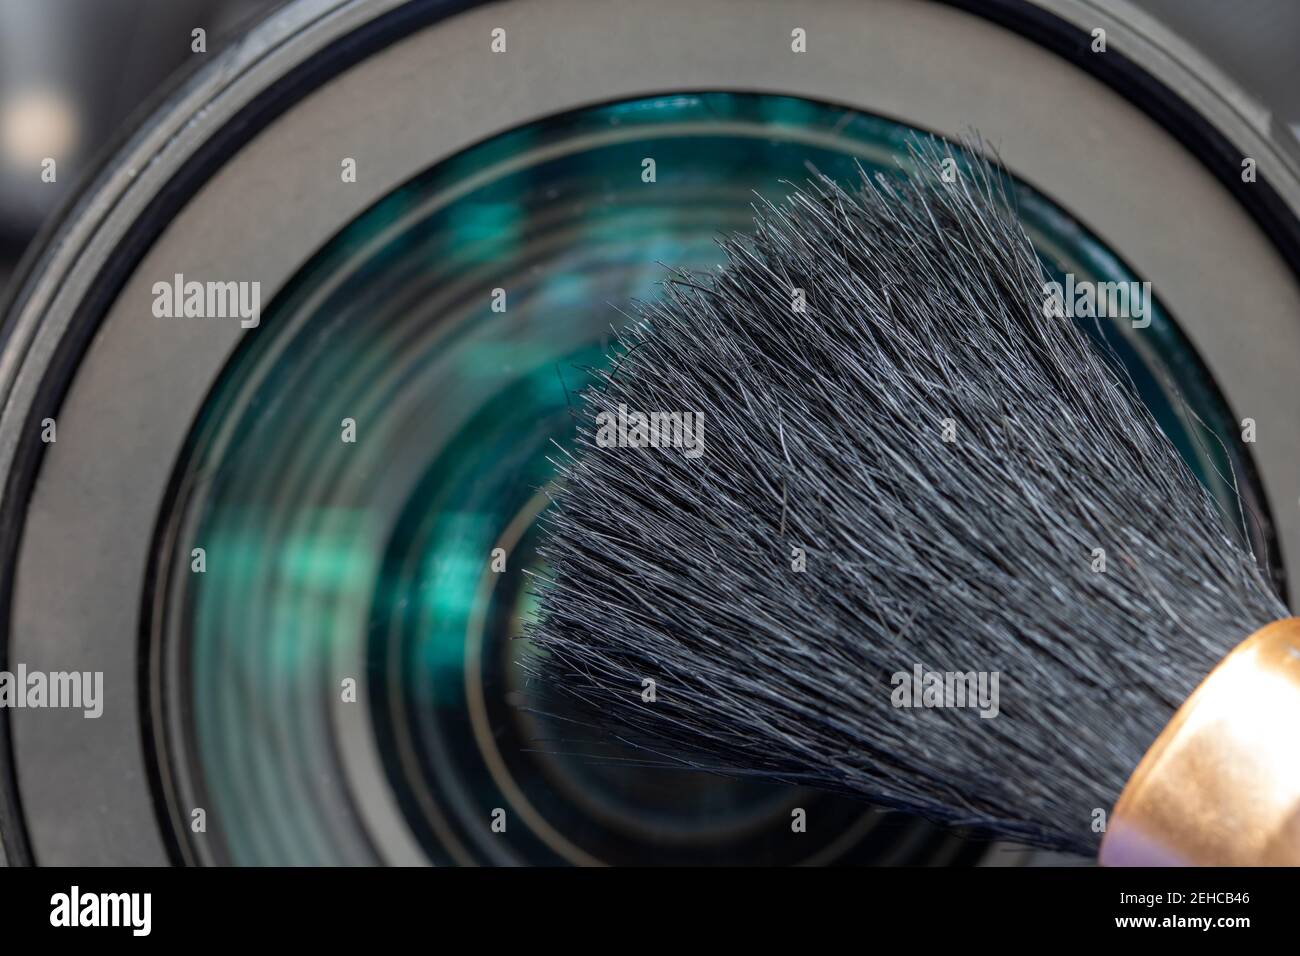 A cleaning camera lens with soft brush, close up view. Stock Photo